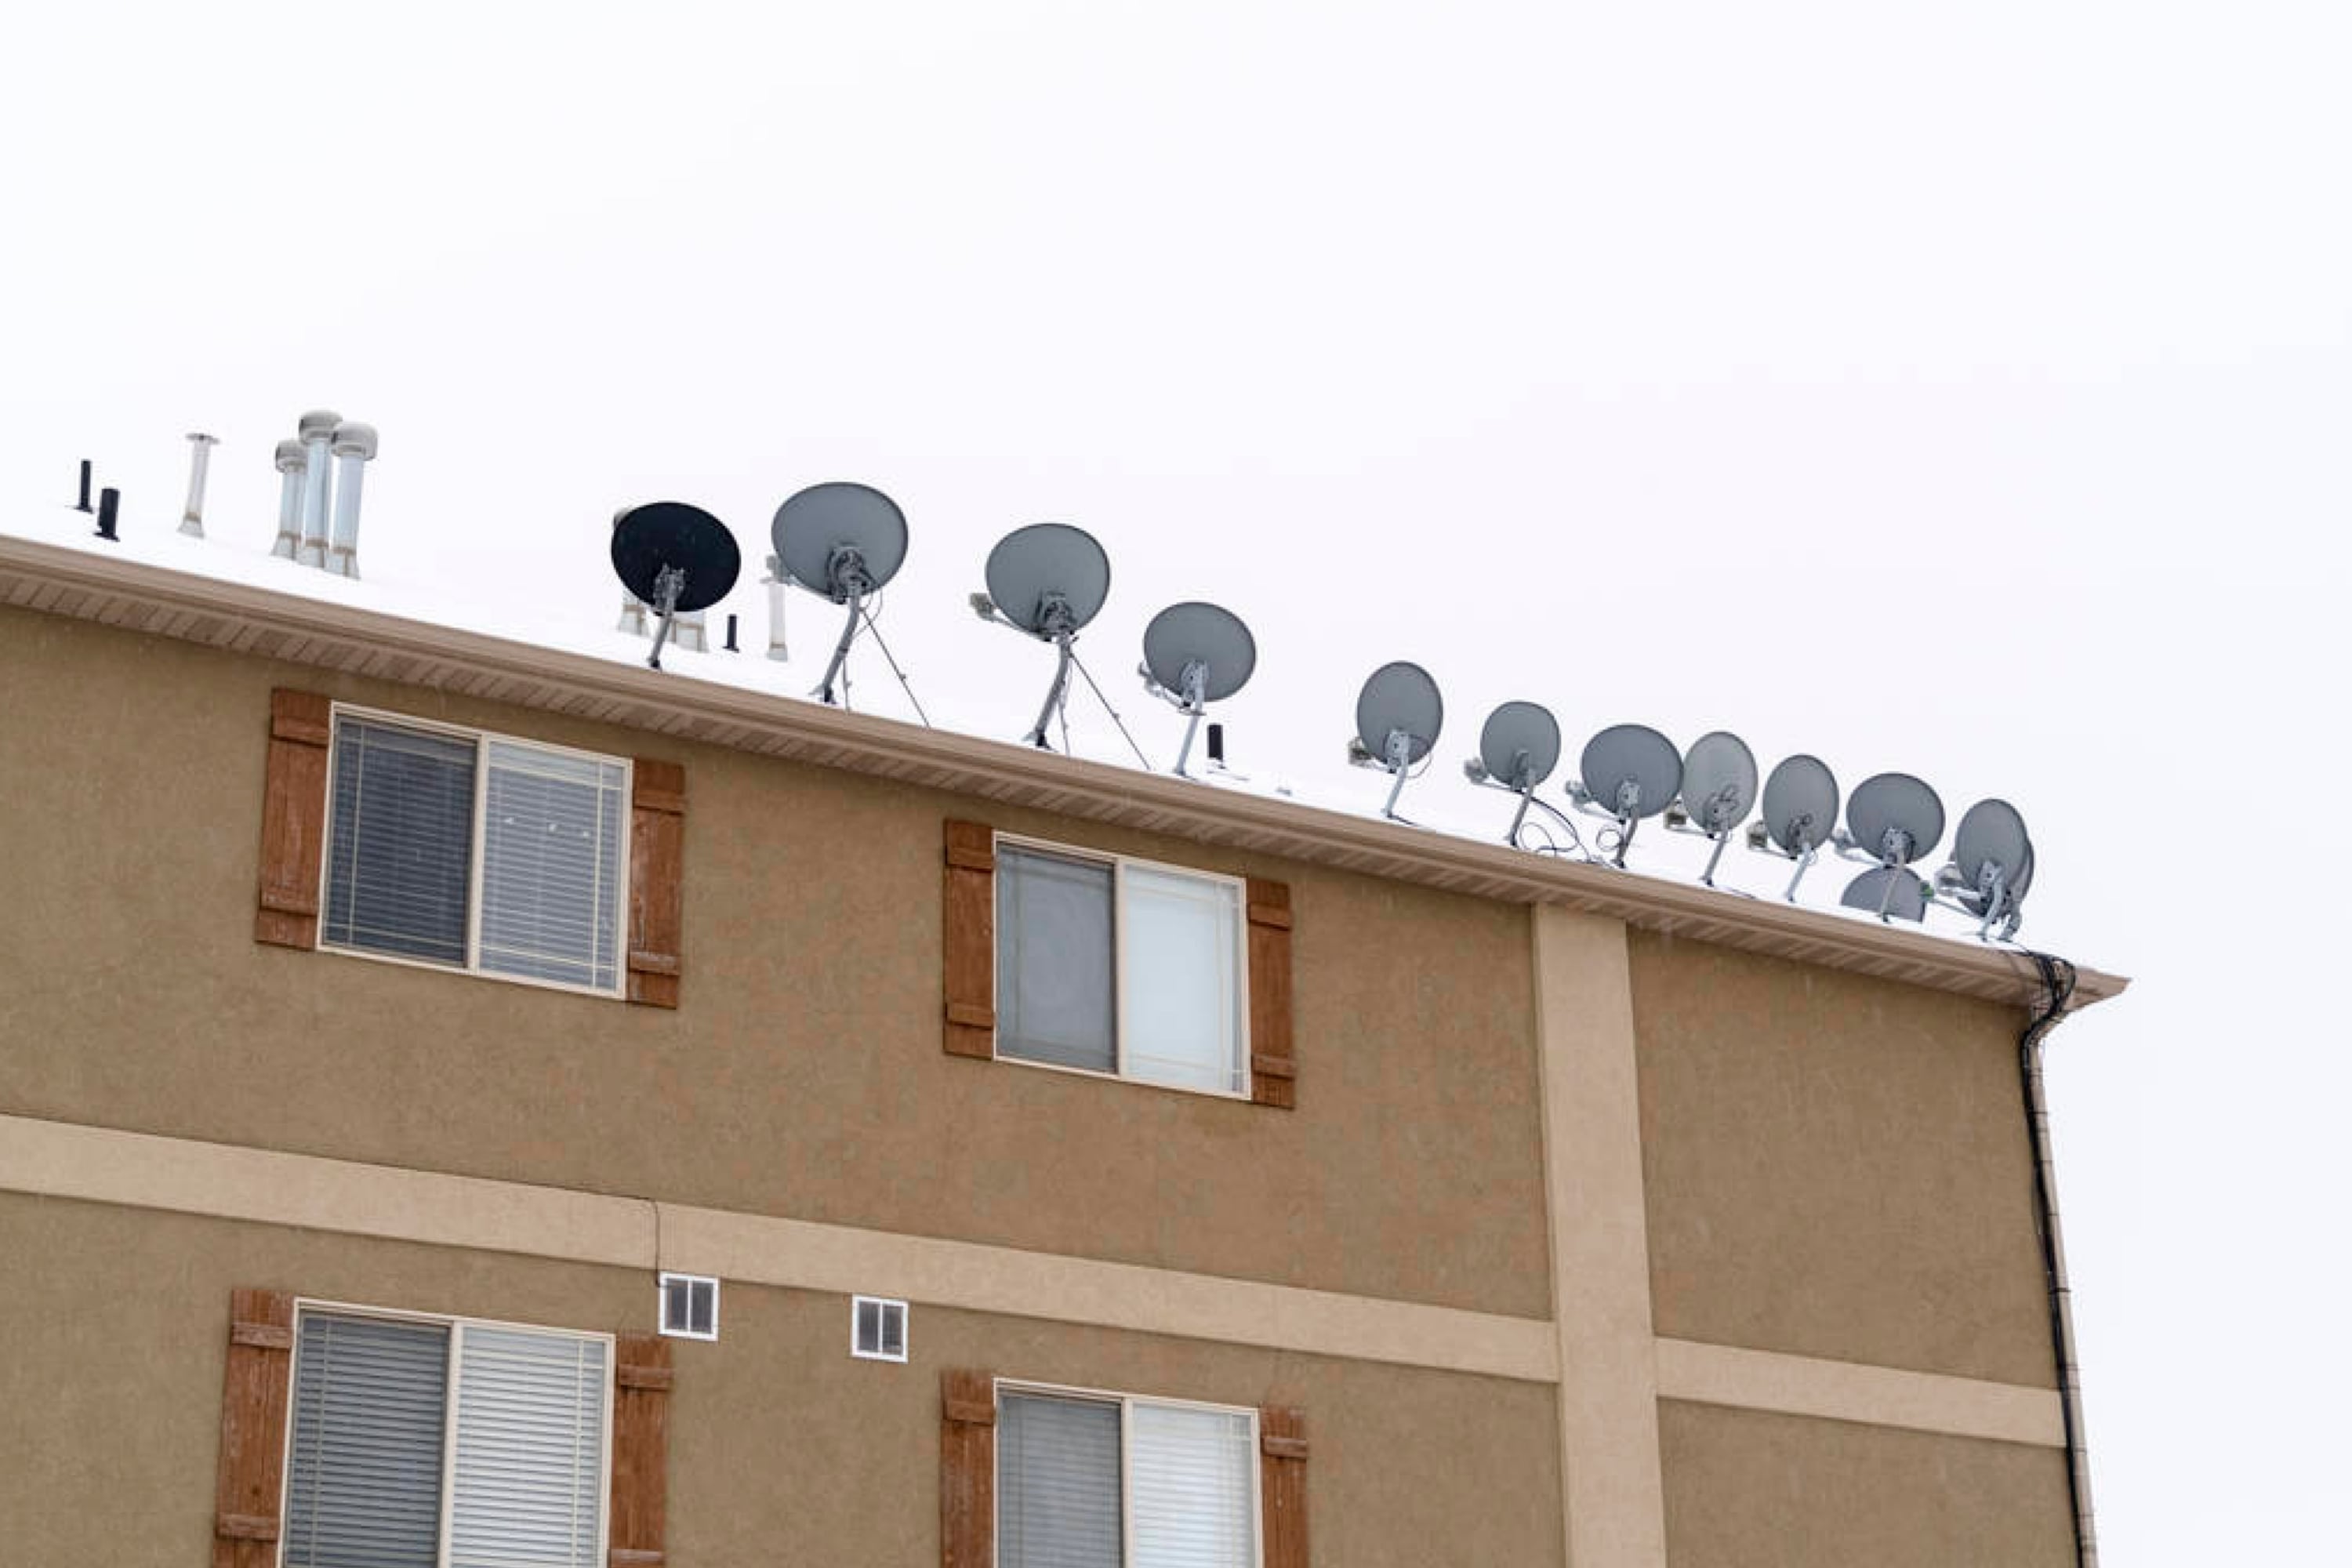 How to Remove Snow From Satellite Dish Without Damaging It